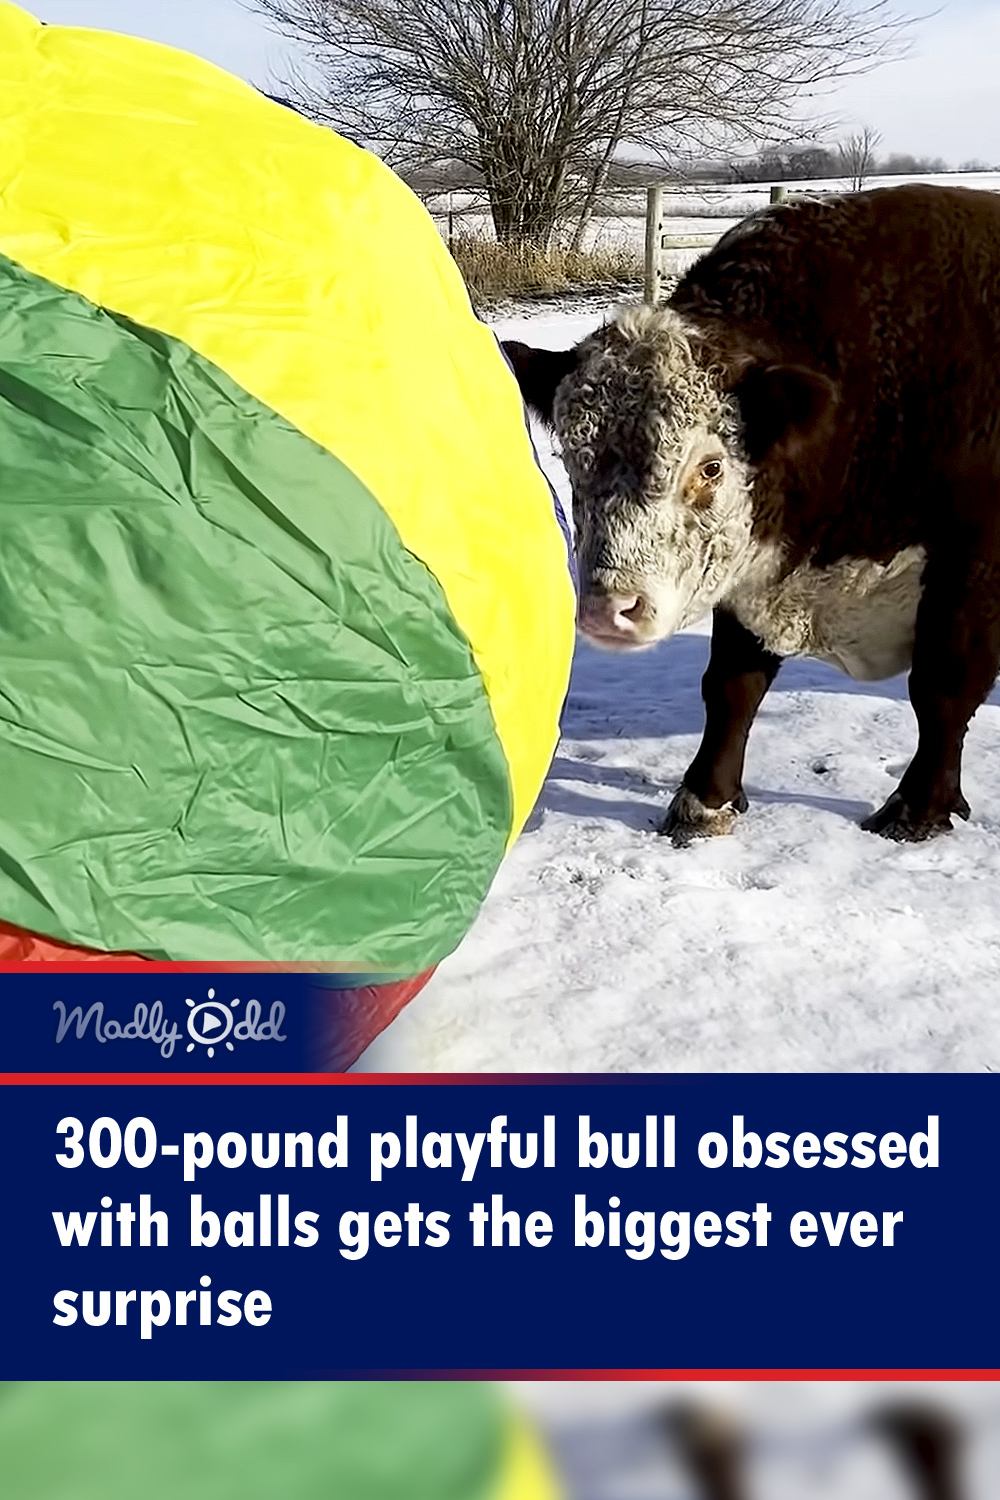 300-pound playful bull obsessed with balls gets the biggest ever surprise